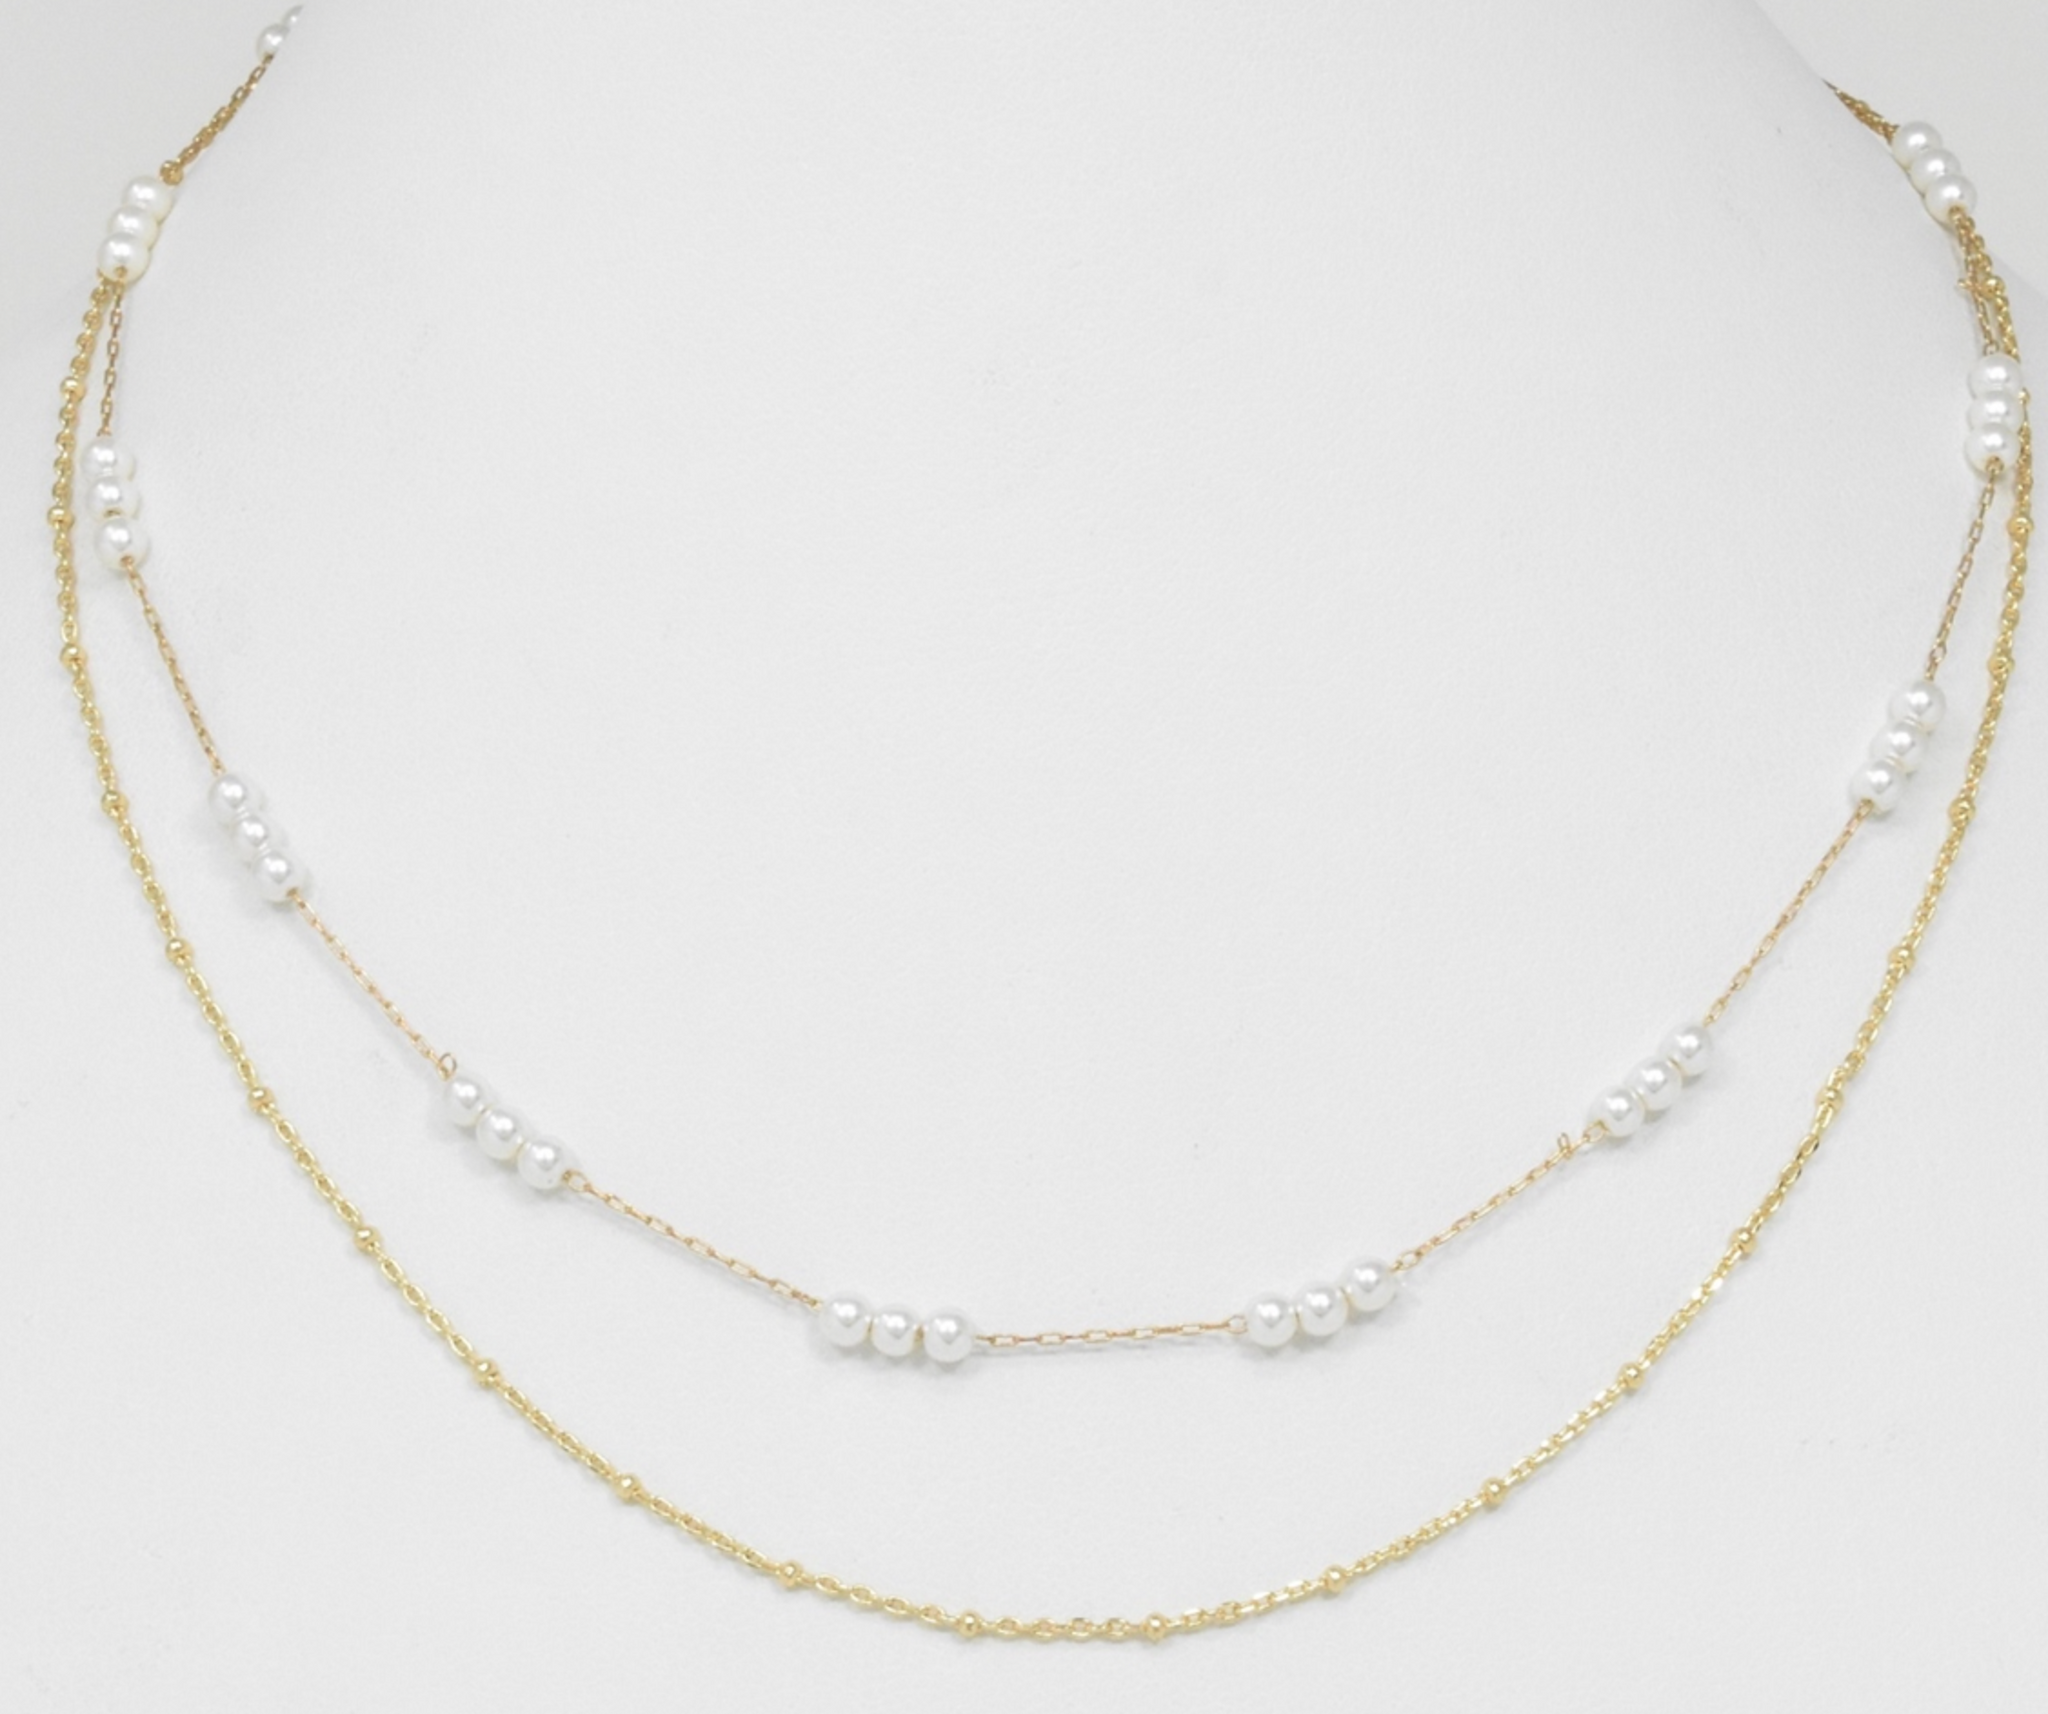 Gold Layered Necklace with Dainty Pearls